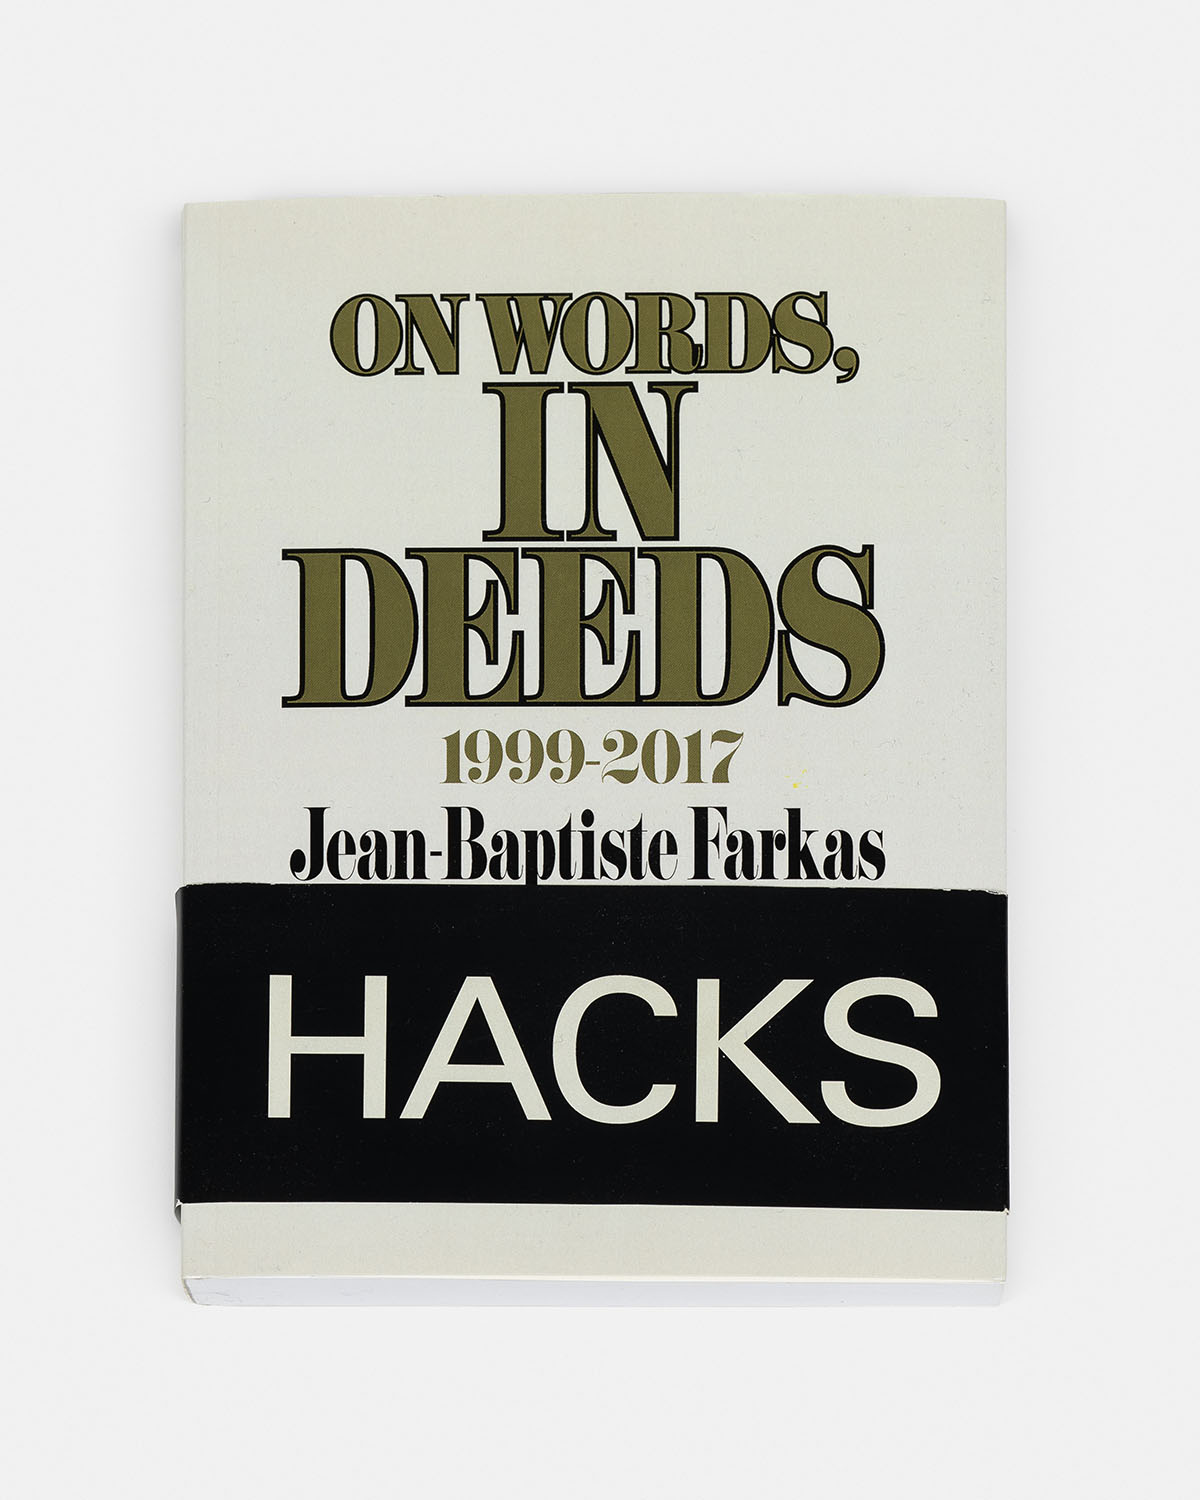 On words, in deeds, 2017 - Additional view